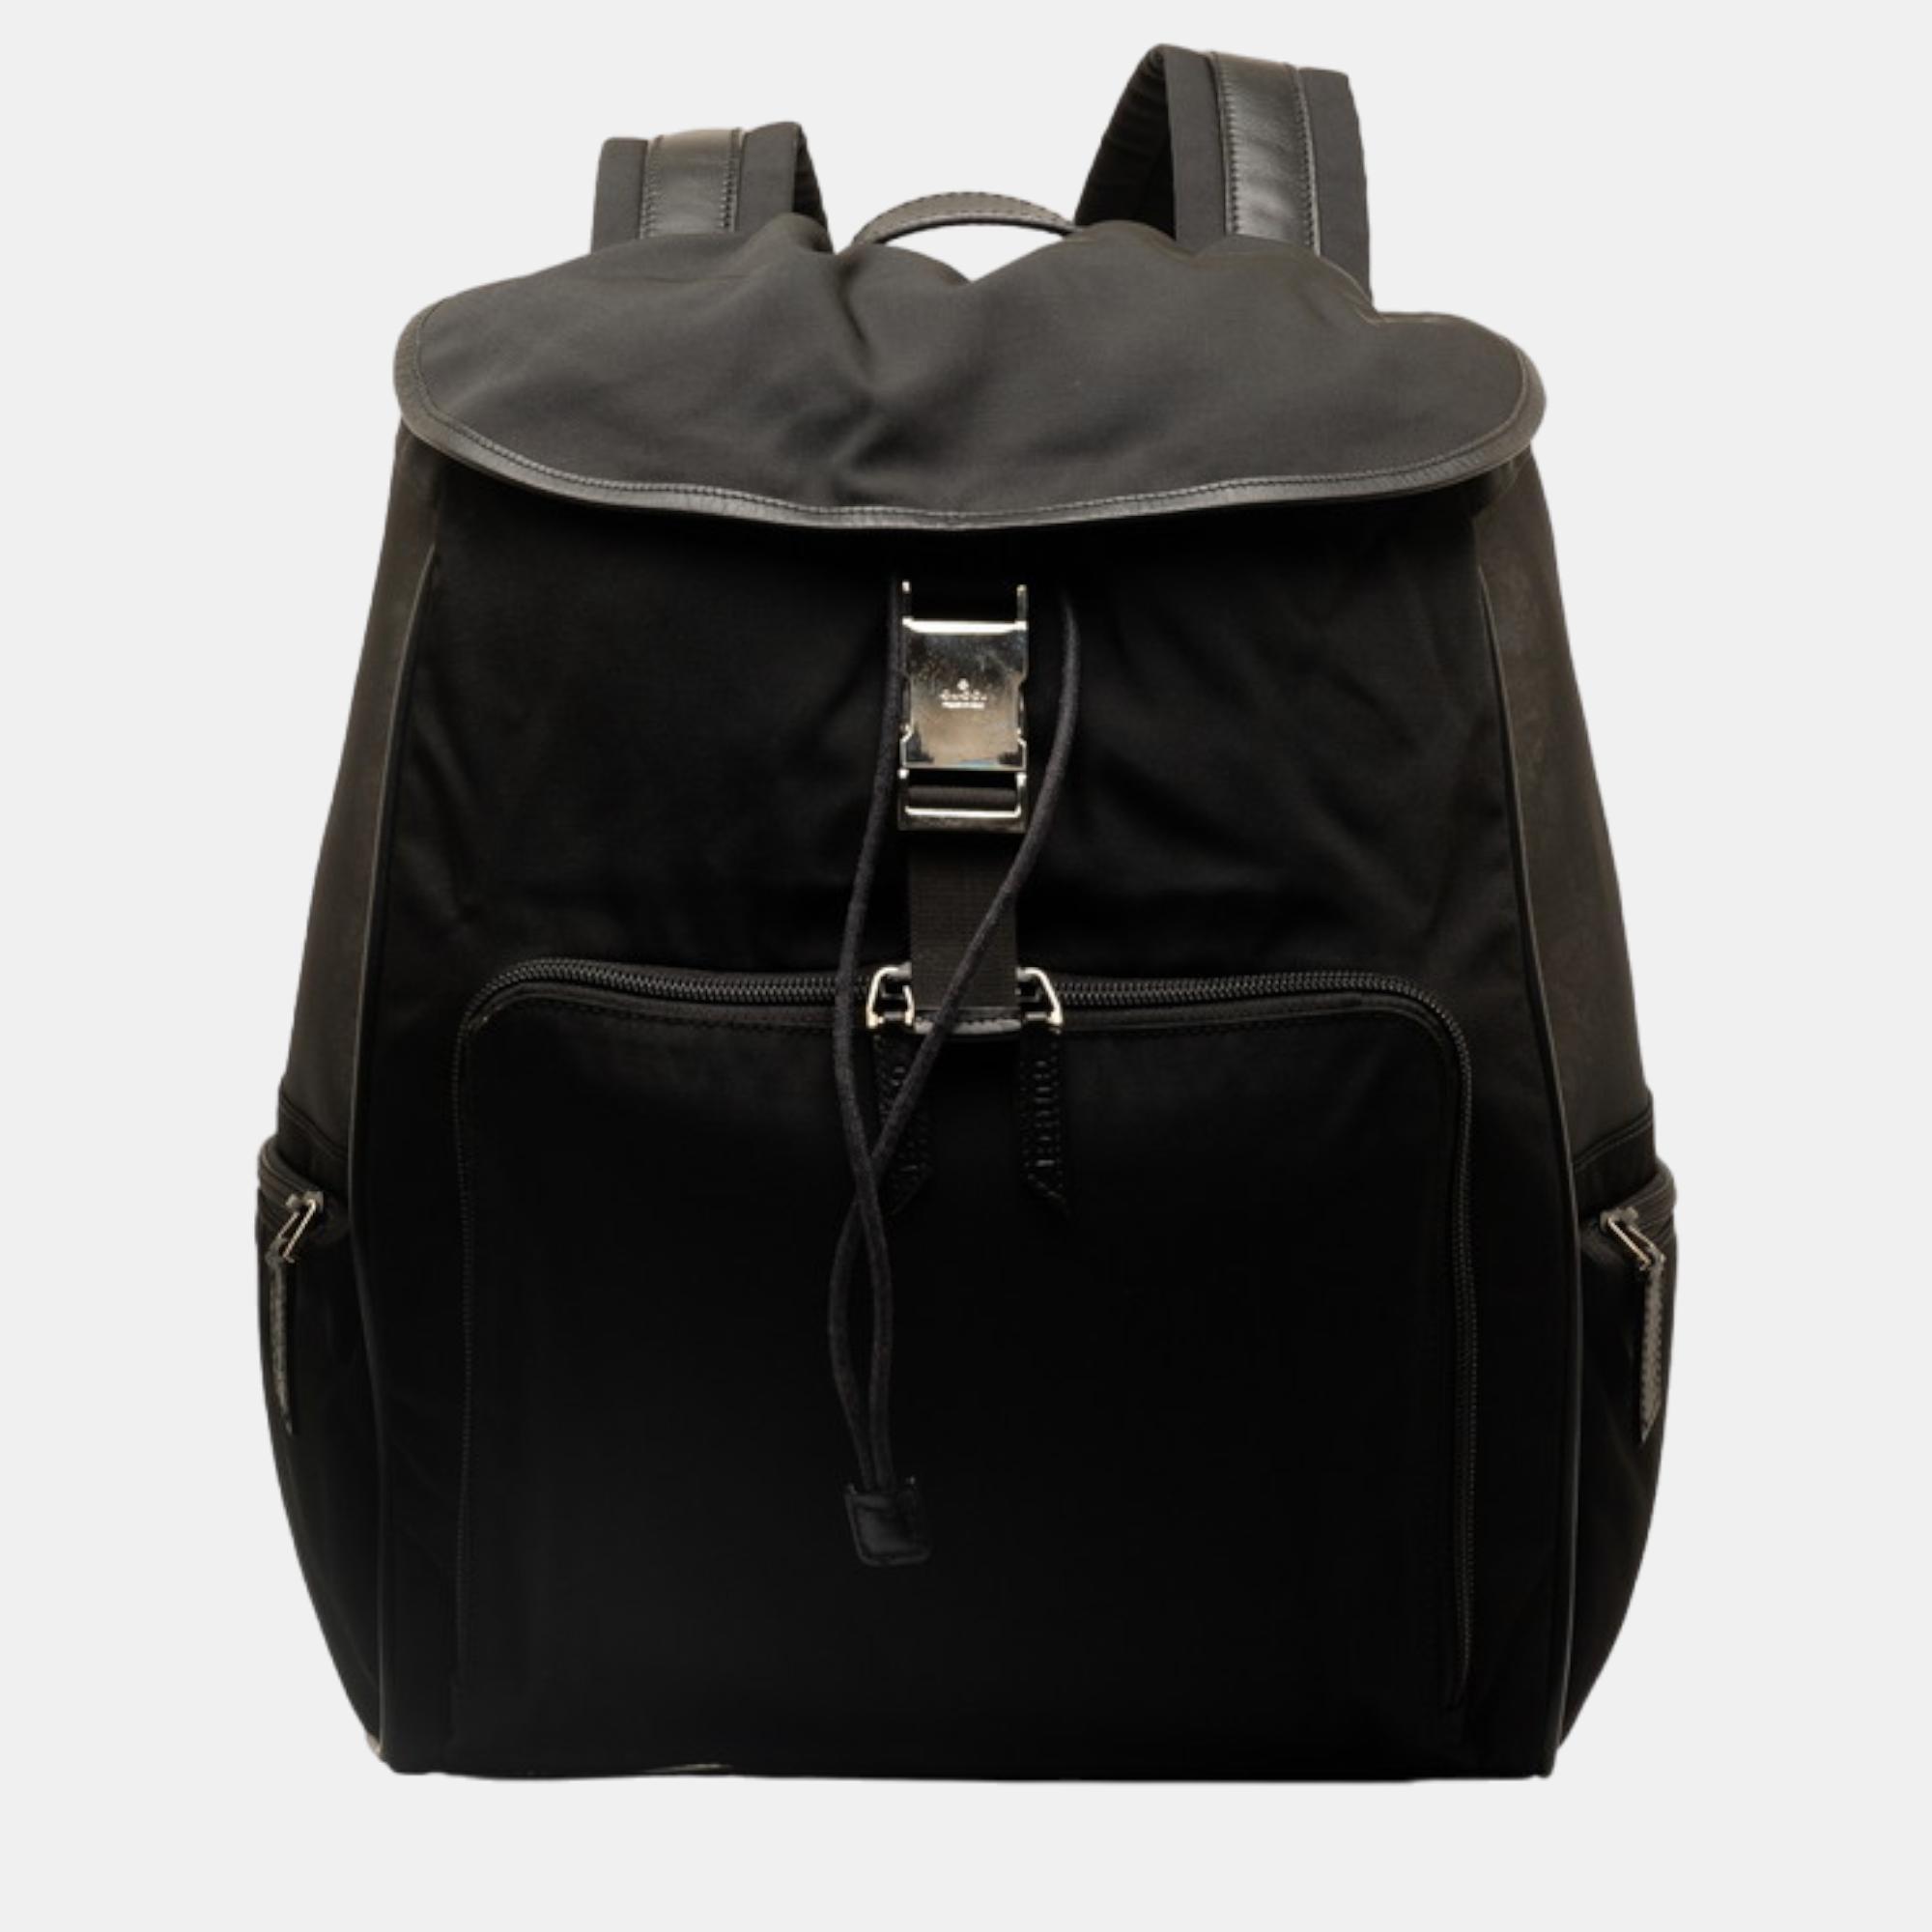 Gucci black nylon and leather trim backpack